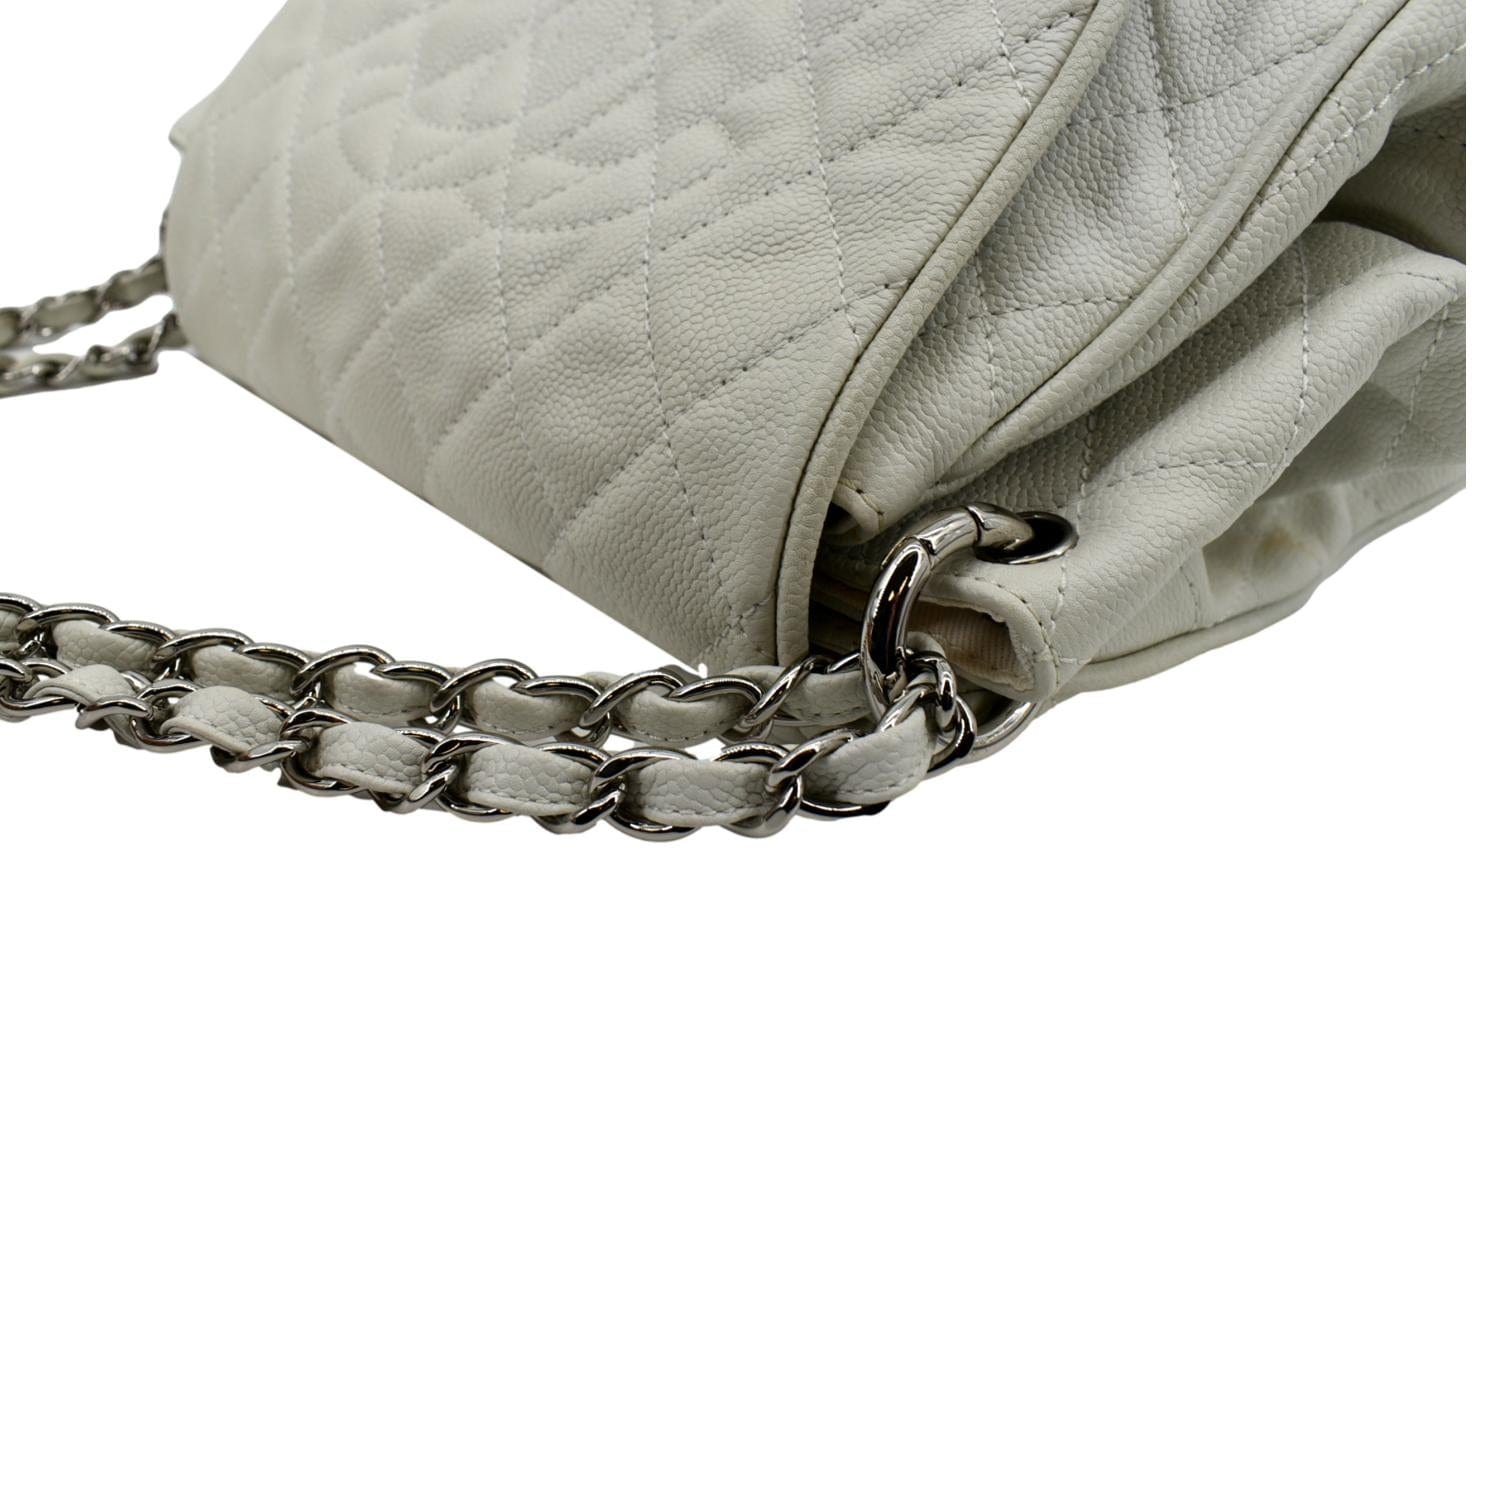 Chanel Timeless Accordion Flap Caviar Leather Bag White